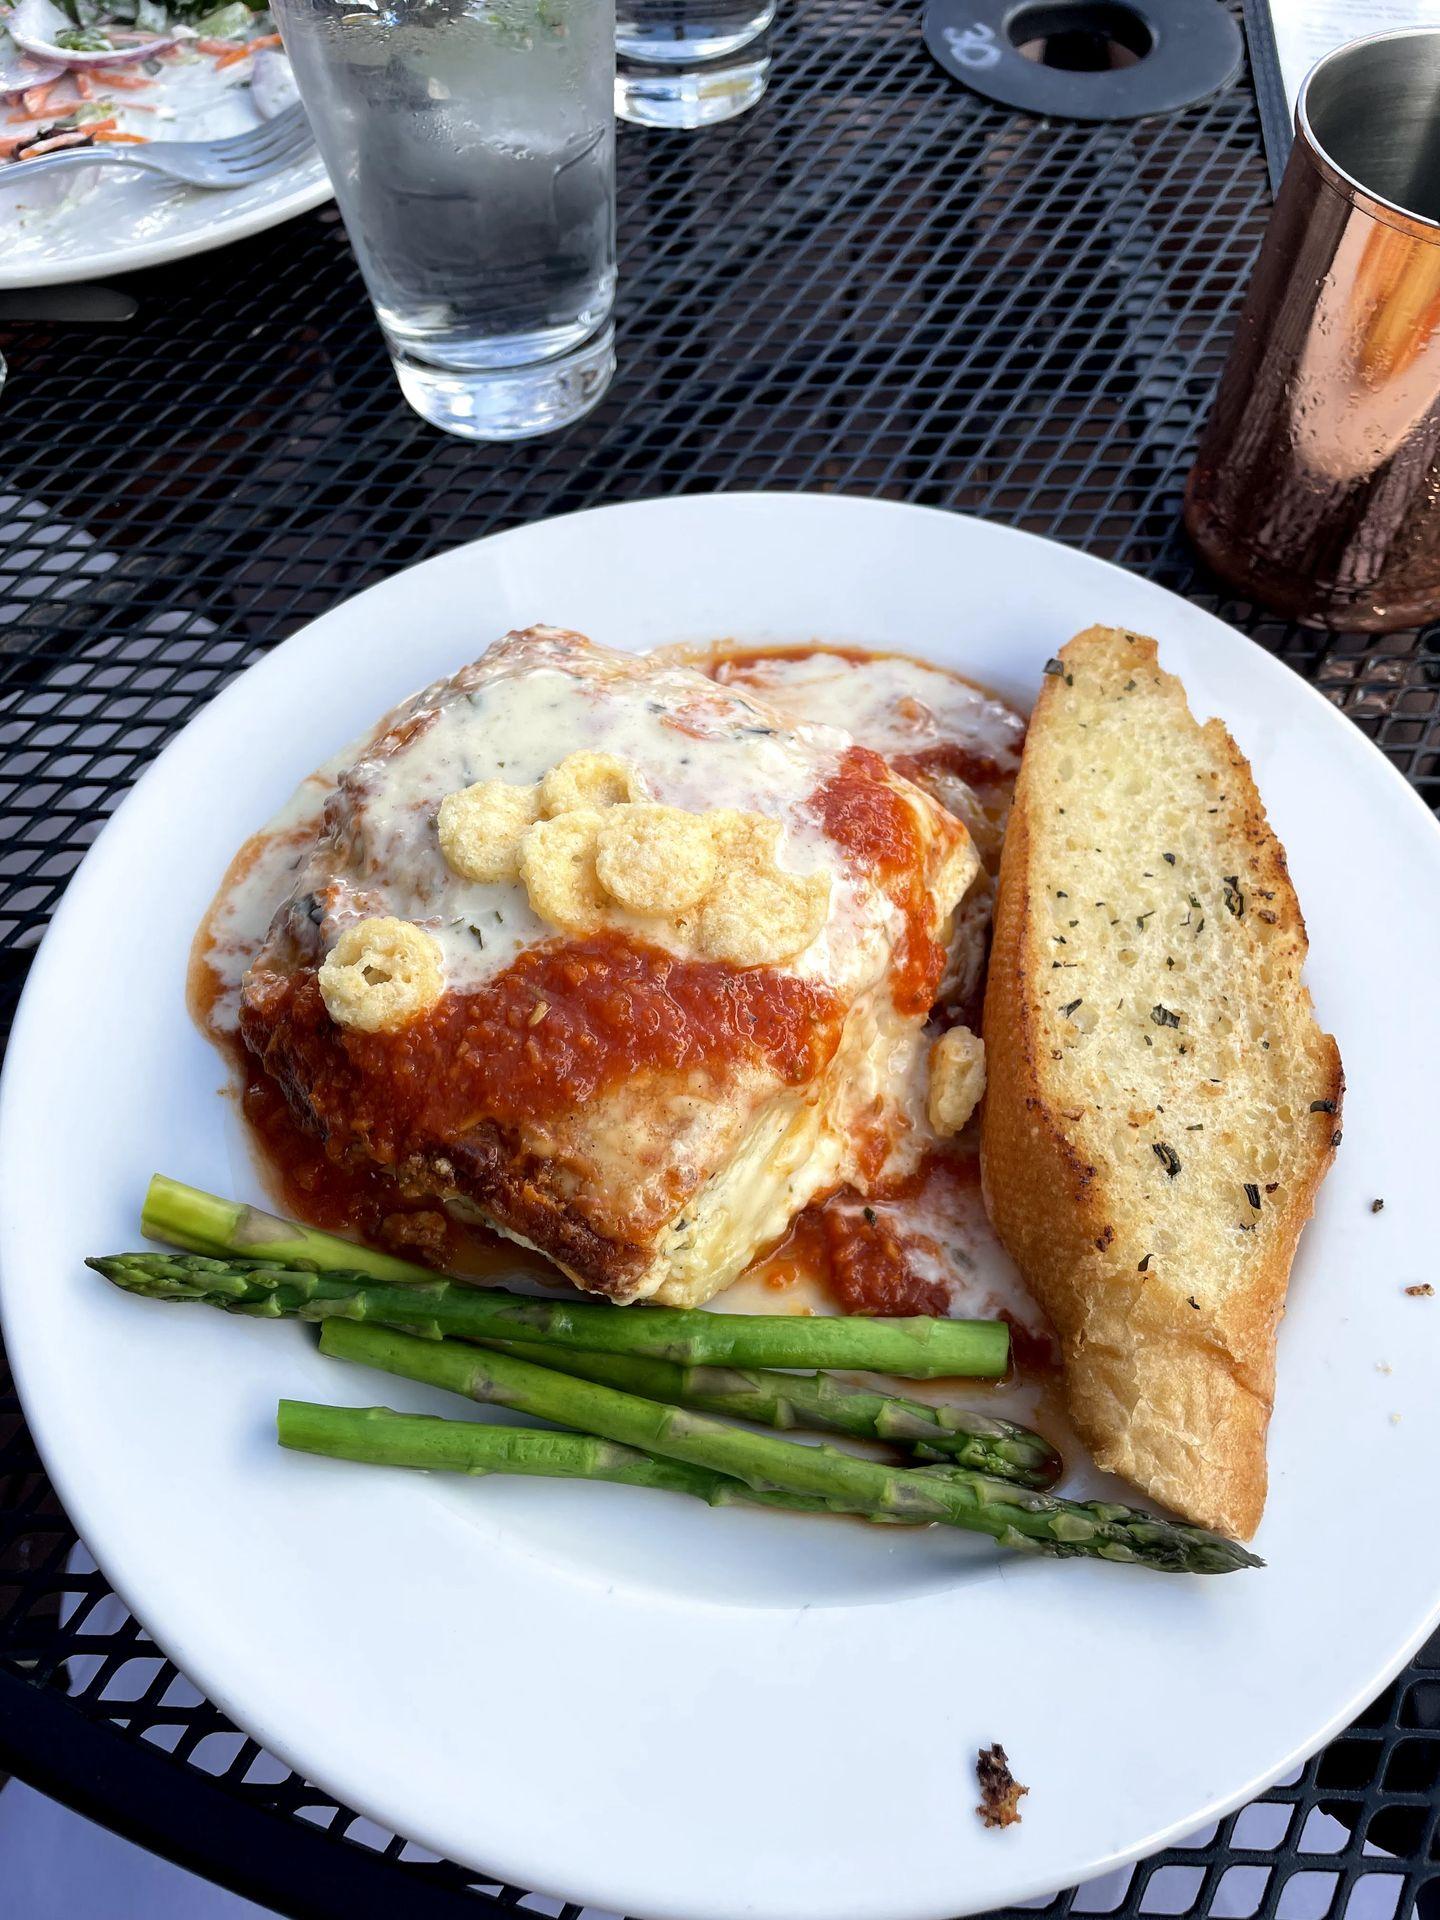 A plate of vegtable lasagna, asparagus and bread from Wild Thyme Cafe.